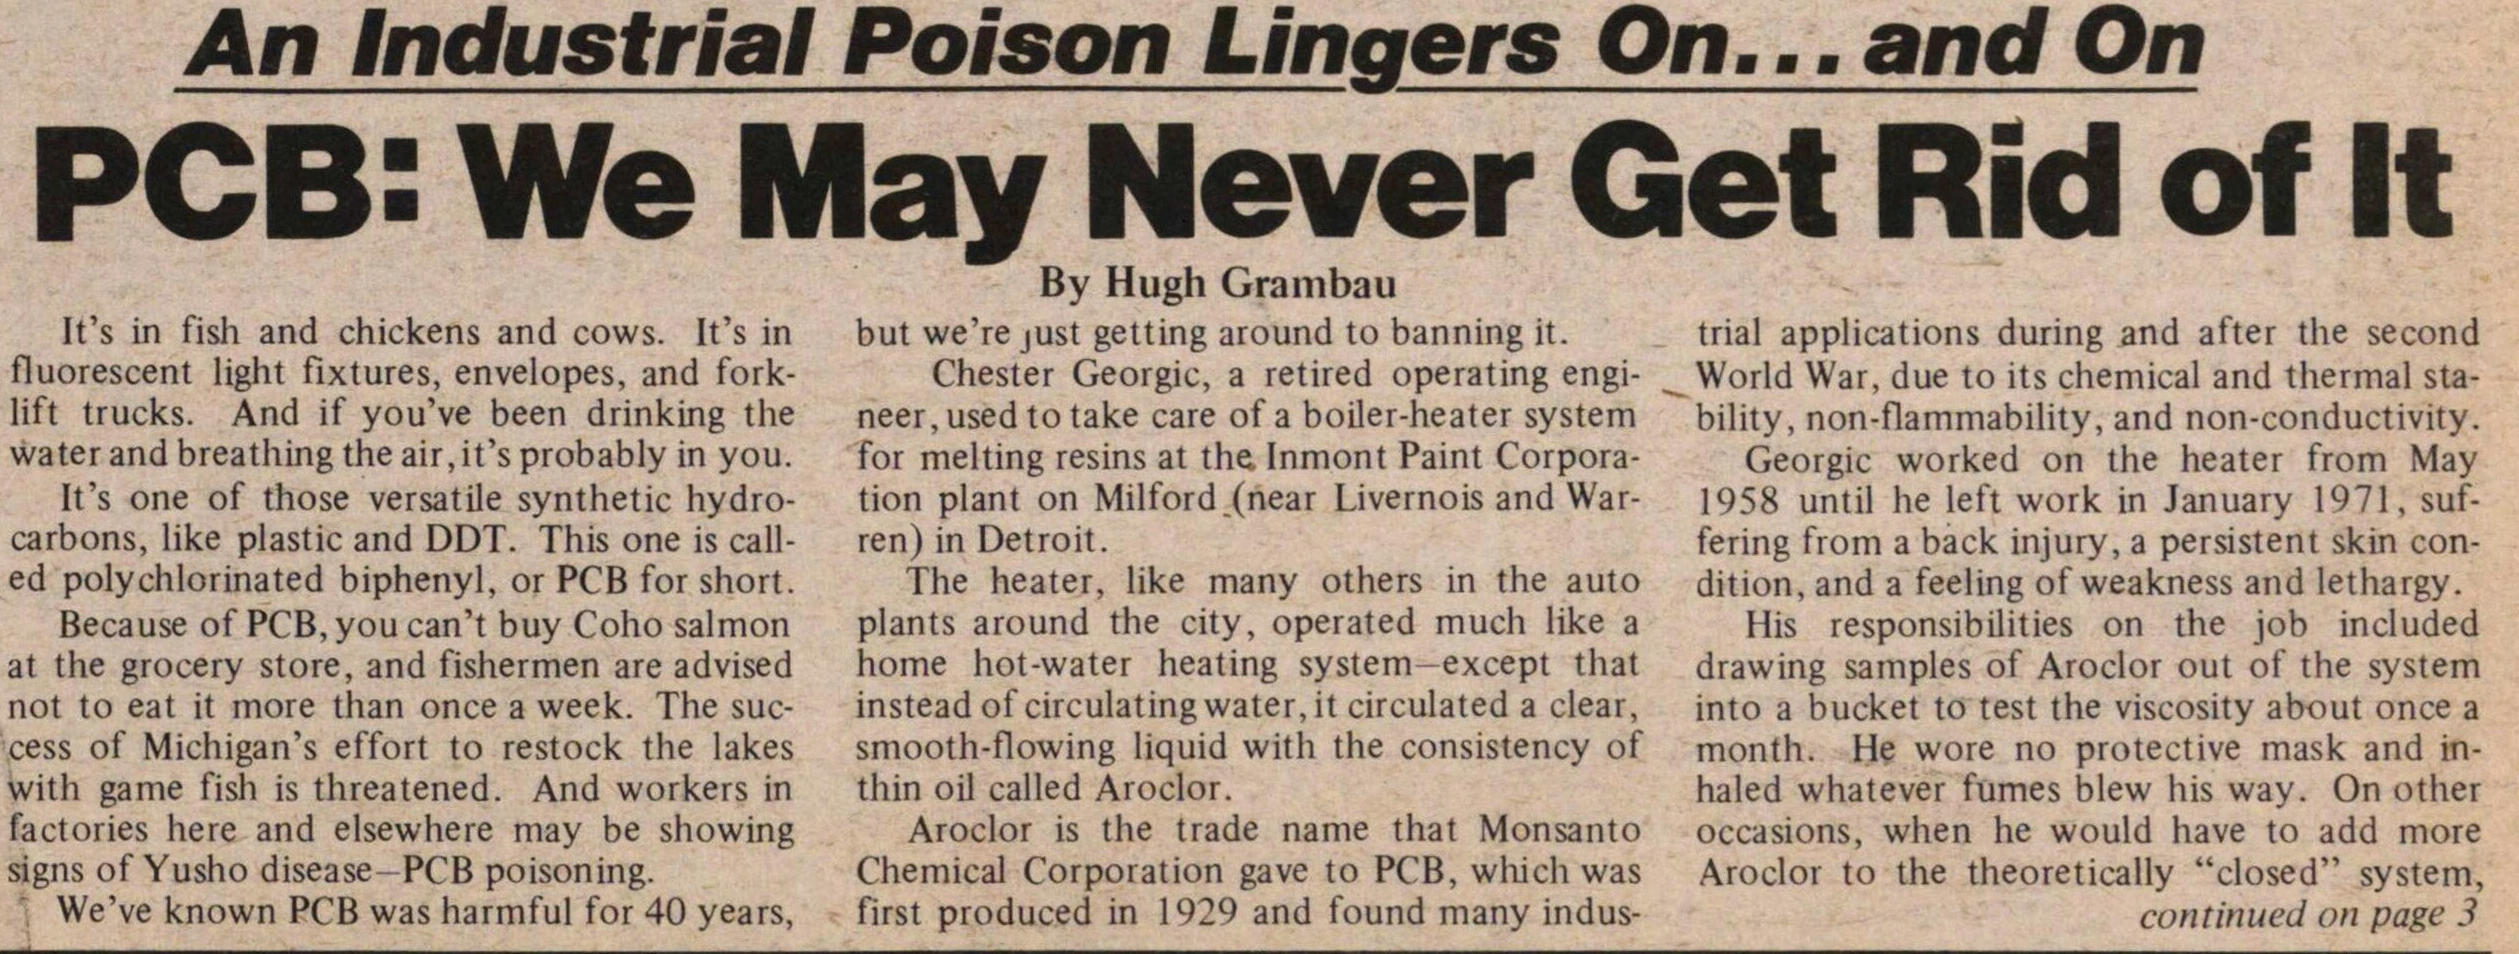 PCB - An Industrial Poison Lingers On... And On - Ann Arbor Sun March 1976 (1)